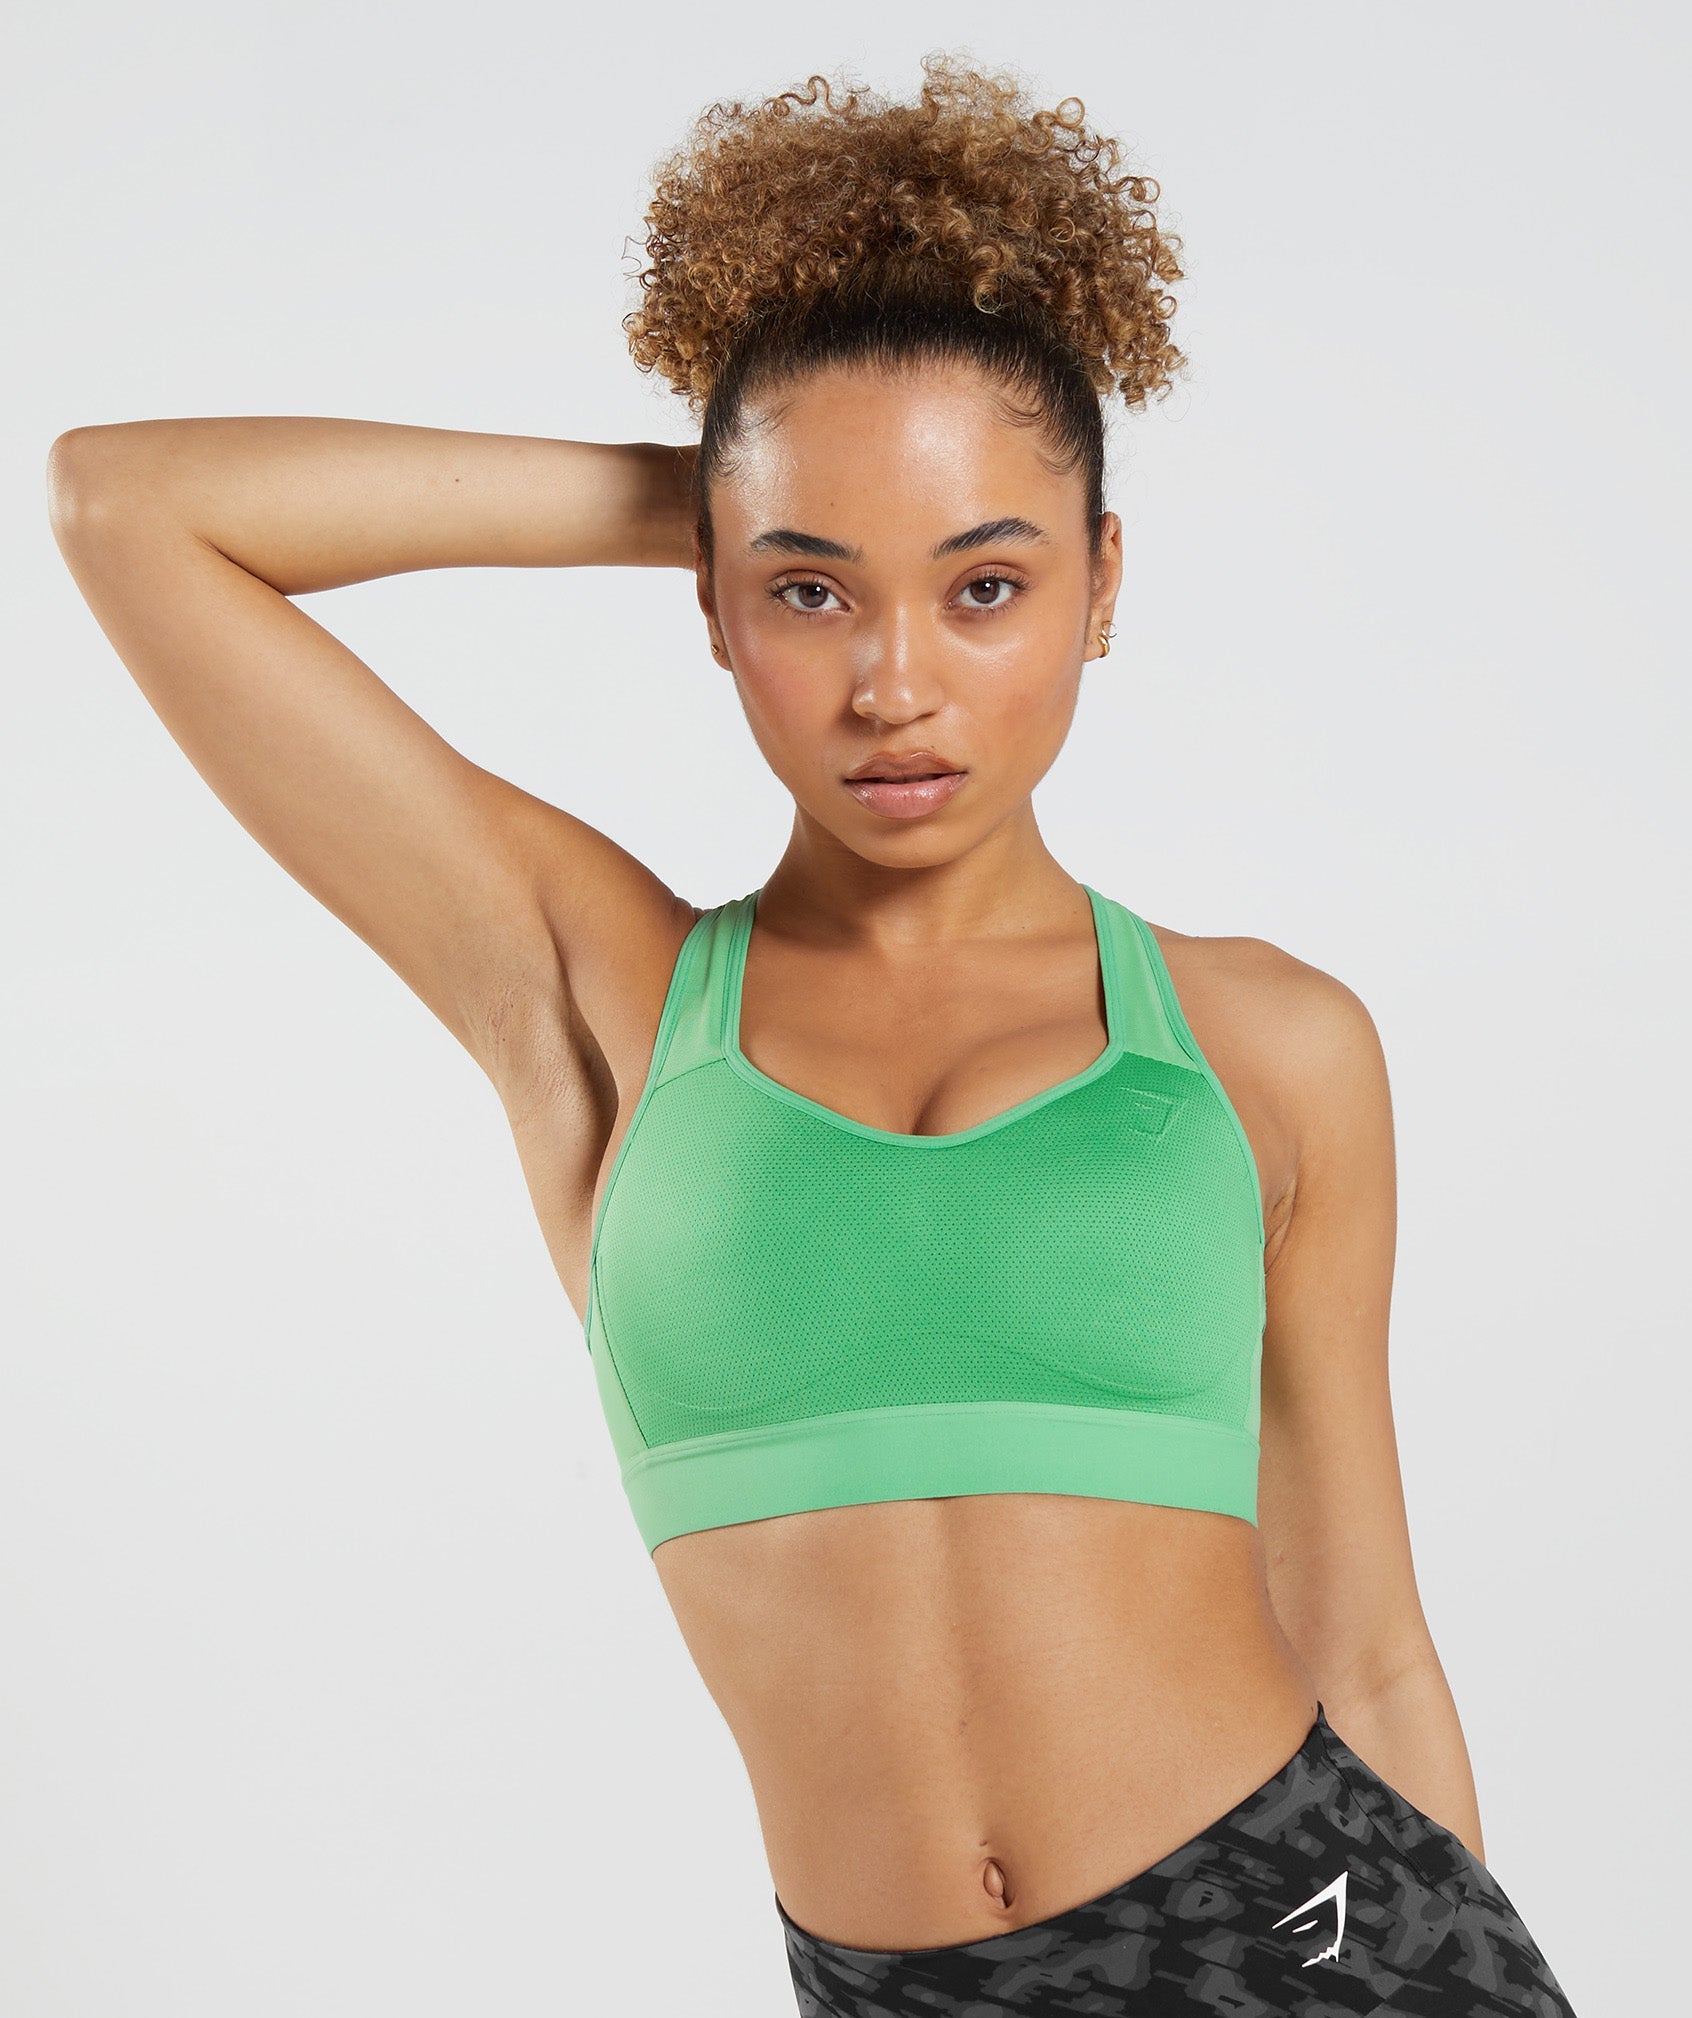  ZYLDDP Women Sports Bra ， Fitness Yoga Vest Female Cross Crop  Top ，Push Up Run with Removable Chest Pad High Impact (Color : Green, Size  : X-Large) : Clothing, Shoes & Jewelry